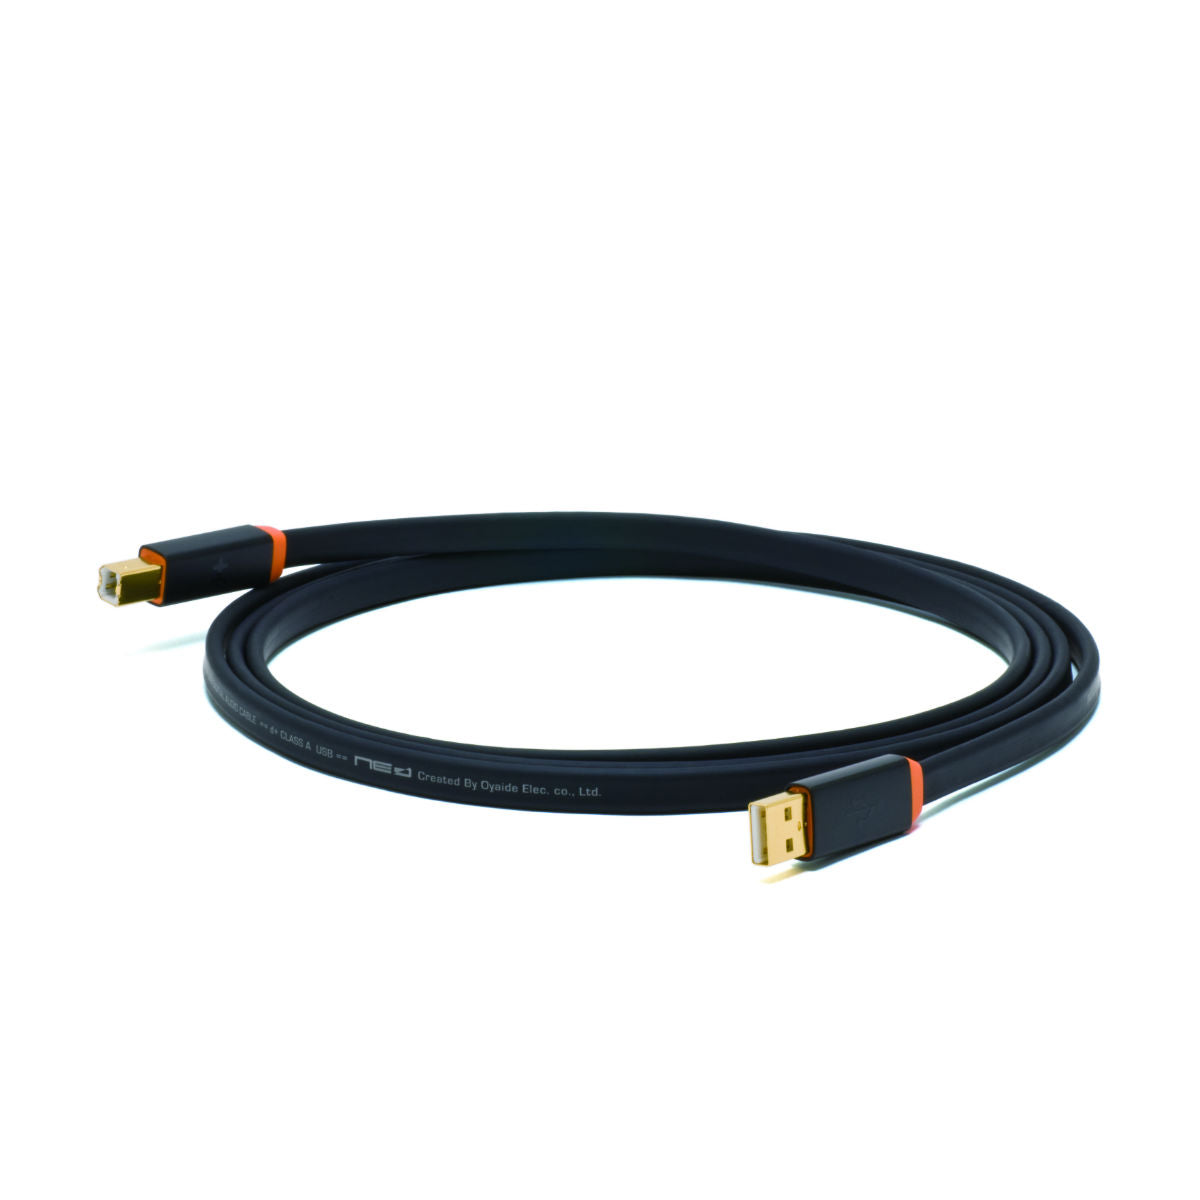 NEO D+ Class A USB A to B Cable - 2m